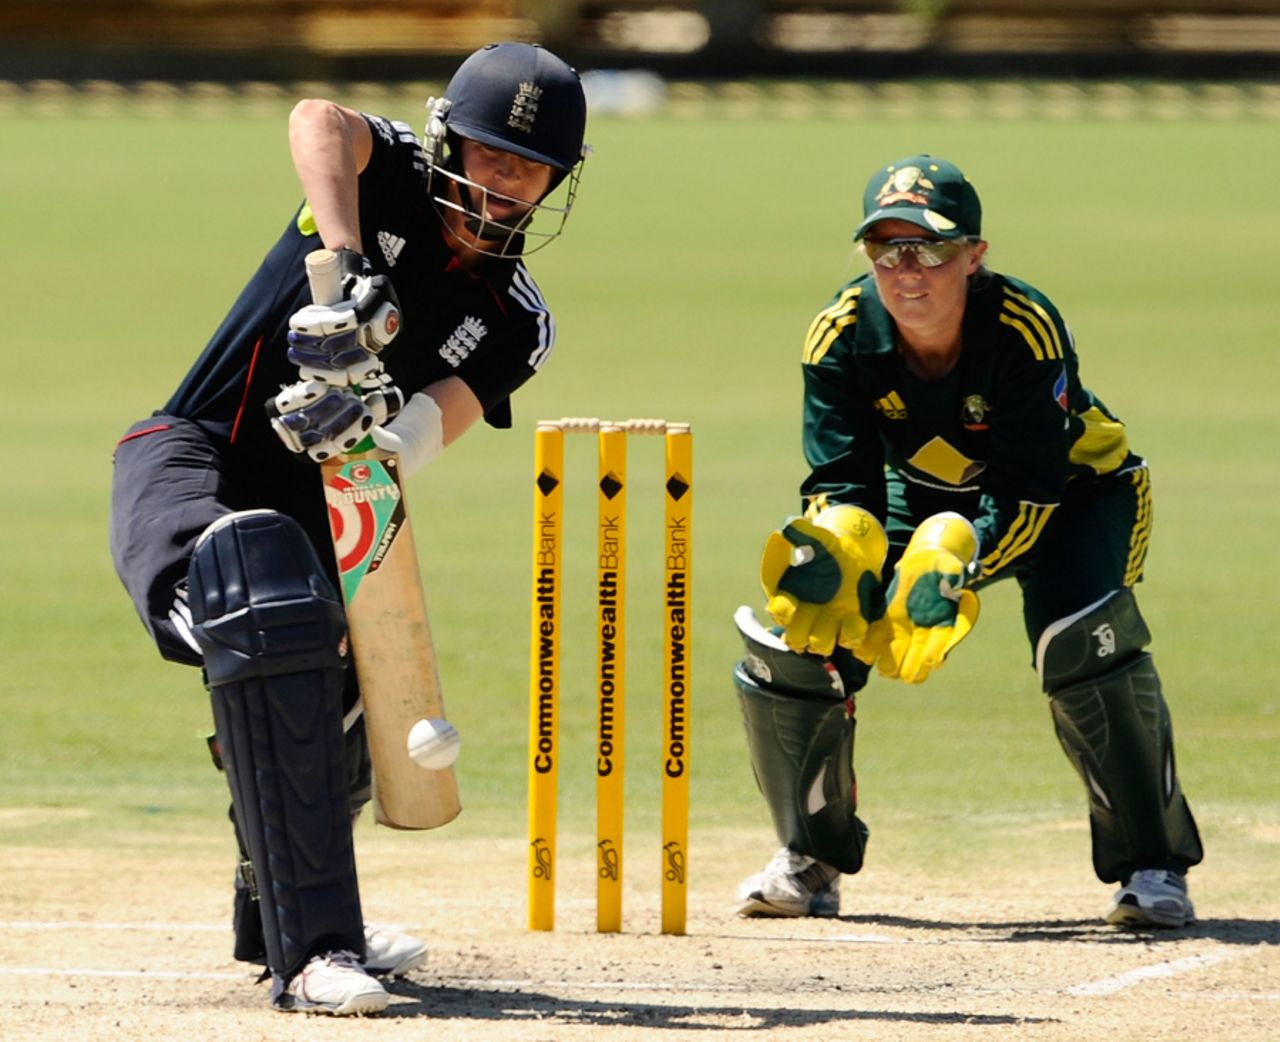 Lydia Greenway is solid in defence during her fifty, Australia Women v England Women, 3rd ODI, Perth, January 9, 2011